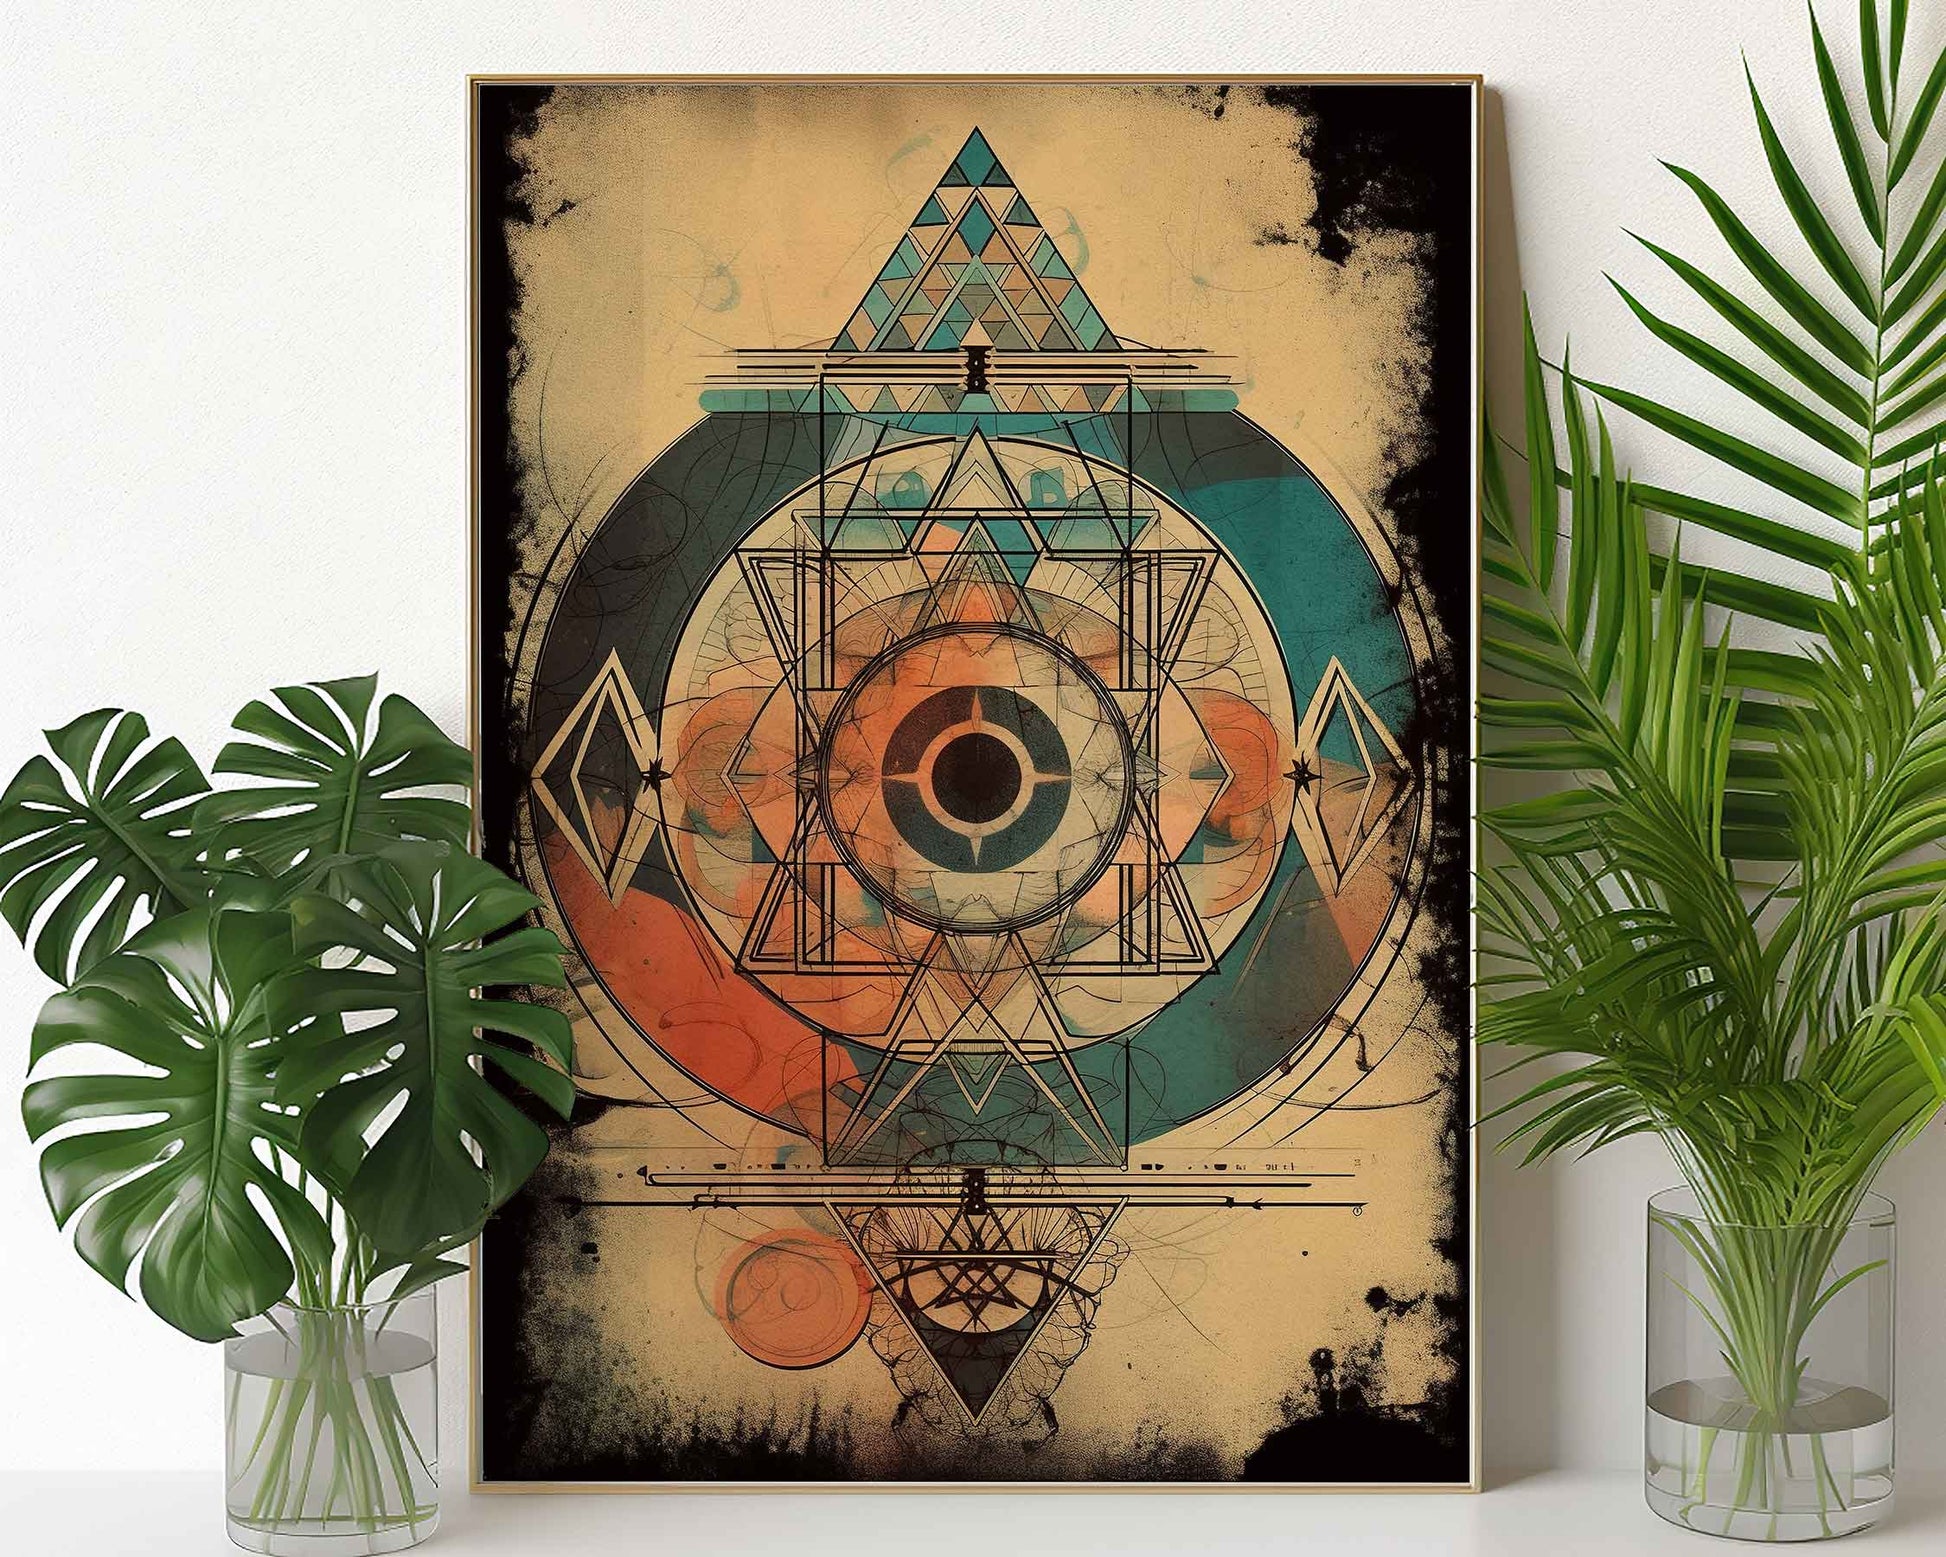 Framed Image of Boho Aztec Geometric Abstract Tribal Style Wall Art Poster Prints